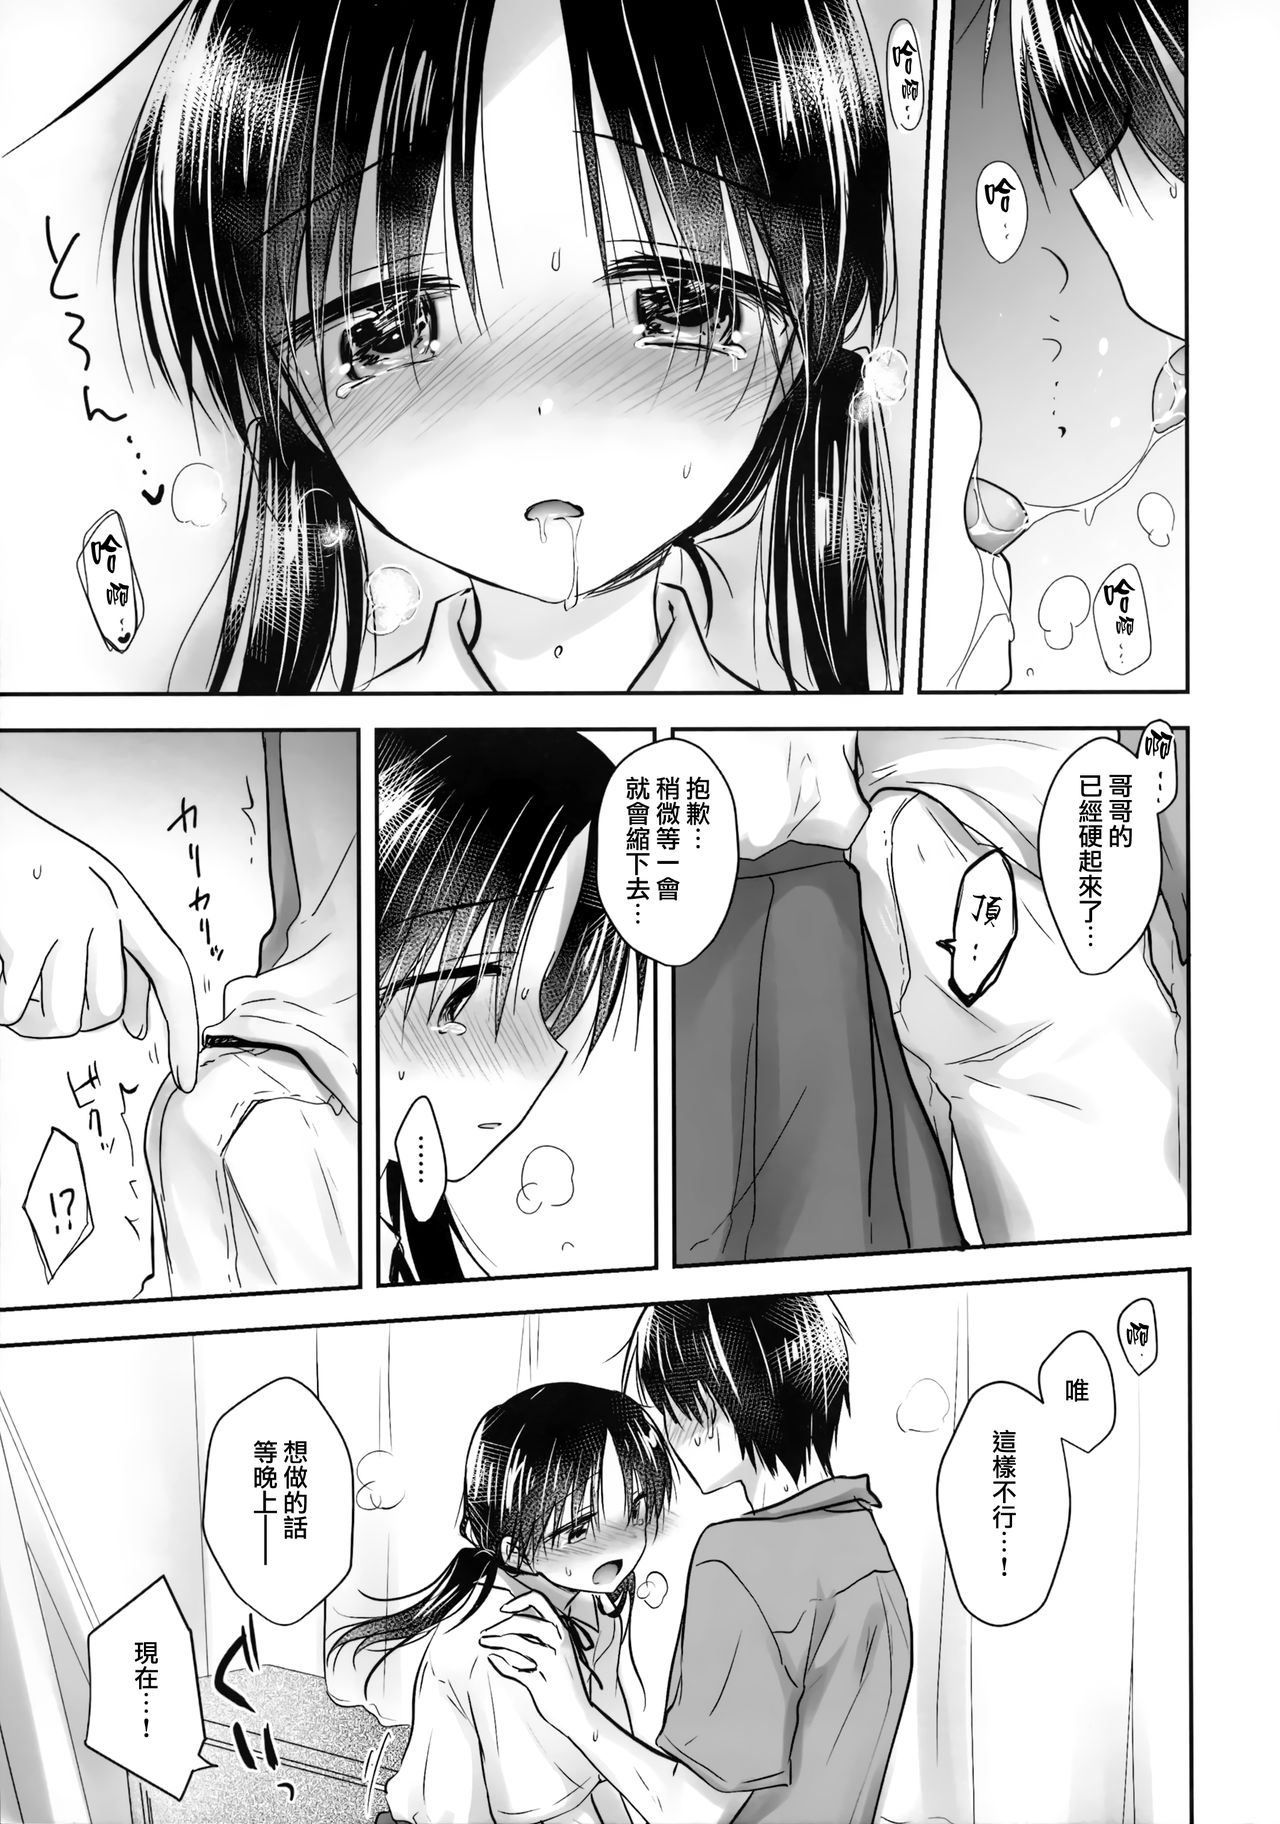 (C96) [Aquadrop (Mikami Mika)] Omoide Sex [Chinese] [山樱汉化] page 28 full